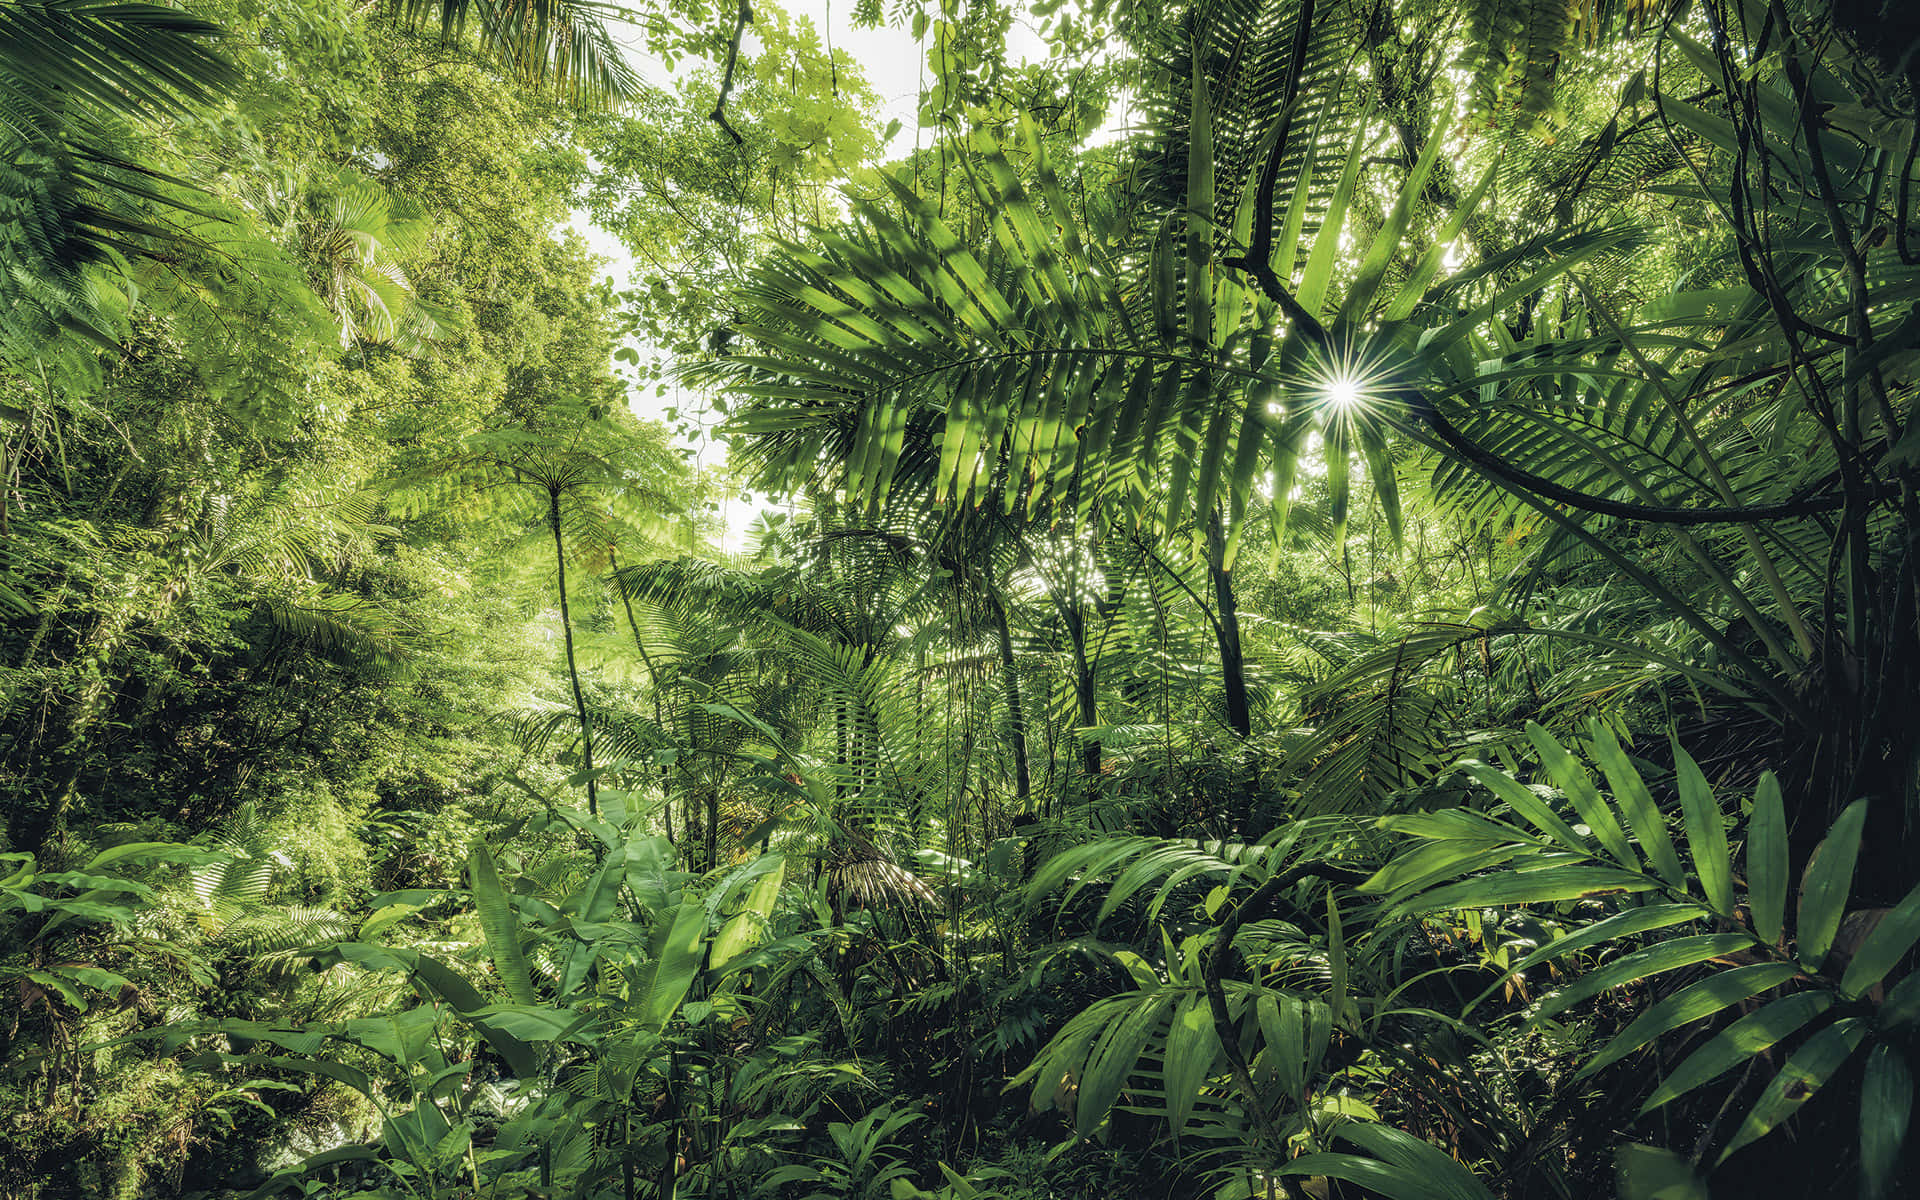 Make your way through the lush green kingdom of the Jungle.